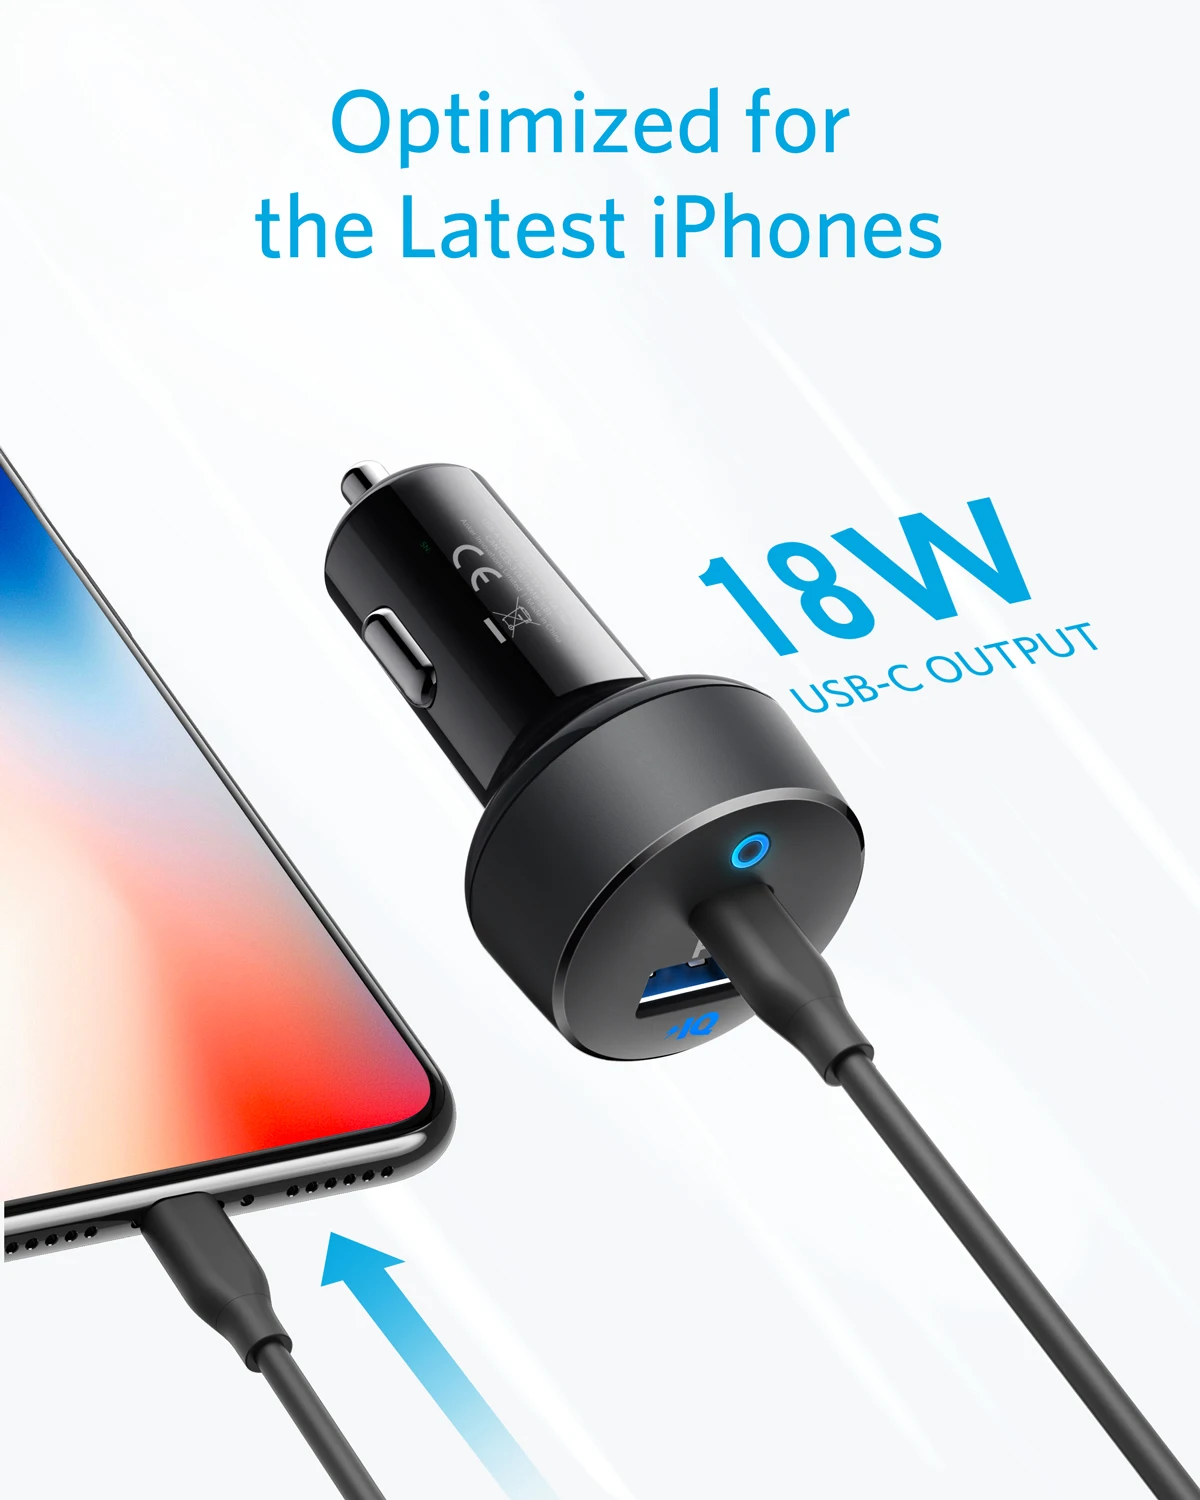 anker car charger usb c 30w 2 port with 18w power delivery and 12w poweriq powerdrive pd 2 with led for ipad iphone and more free global shipping